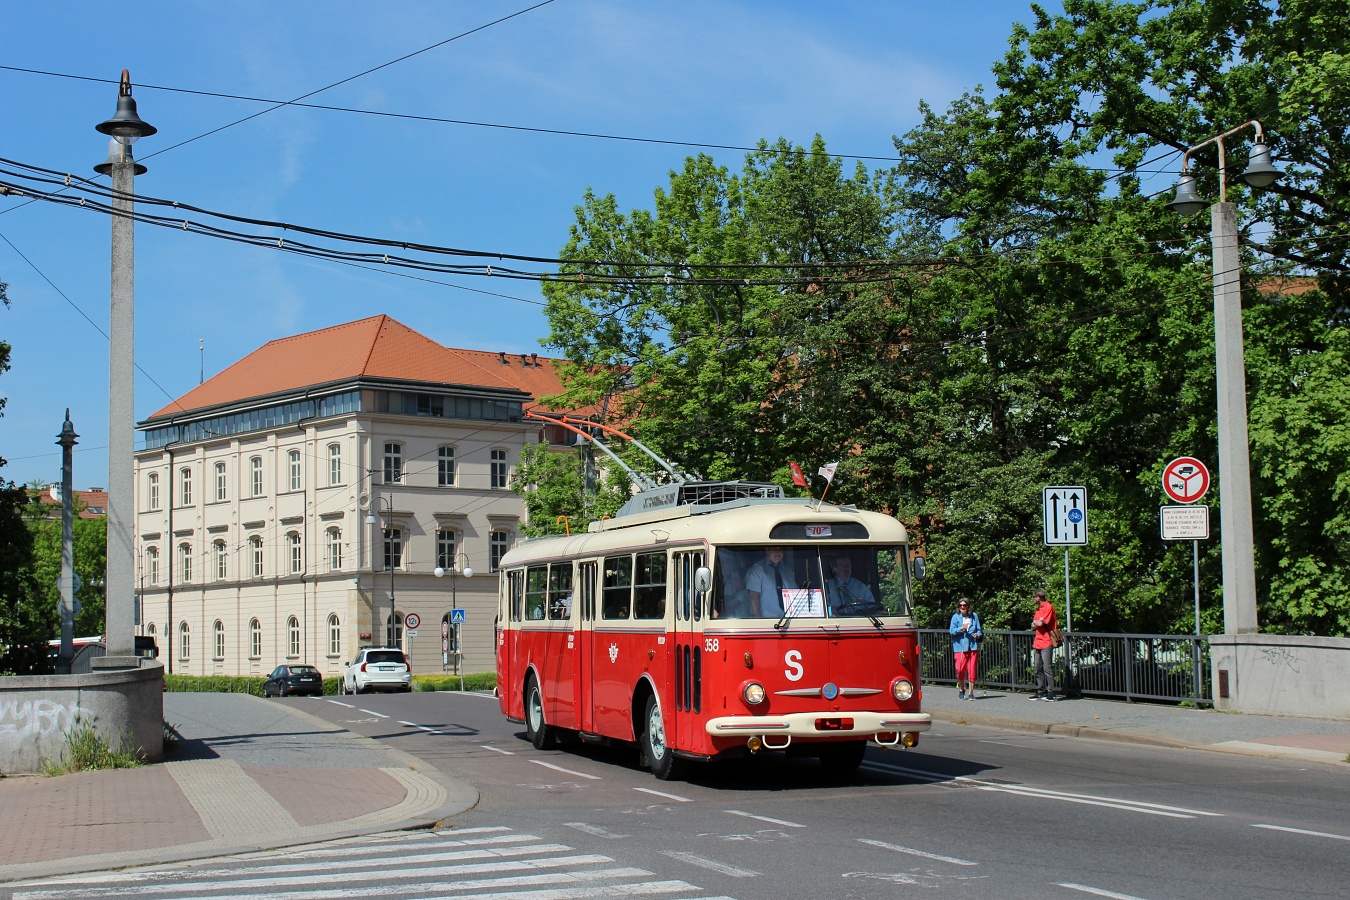 Pardubice, Škoda 9TrHT28 № 358; Pardubice — Celebration of the 70th anniversary of the operation of trolleybuses in Pardubice